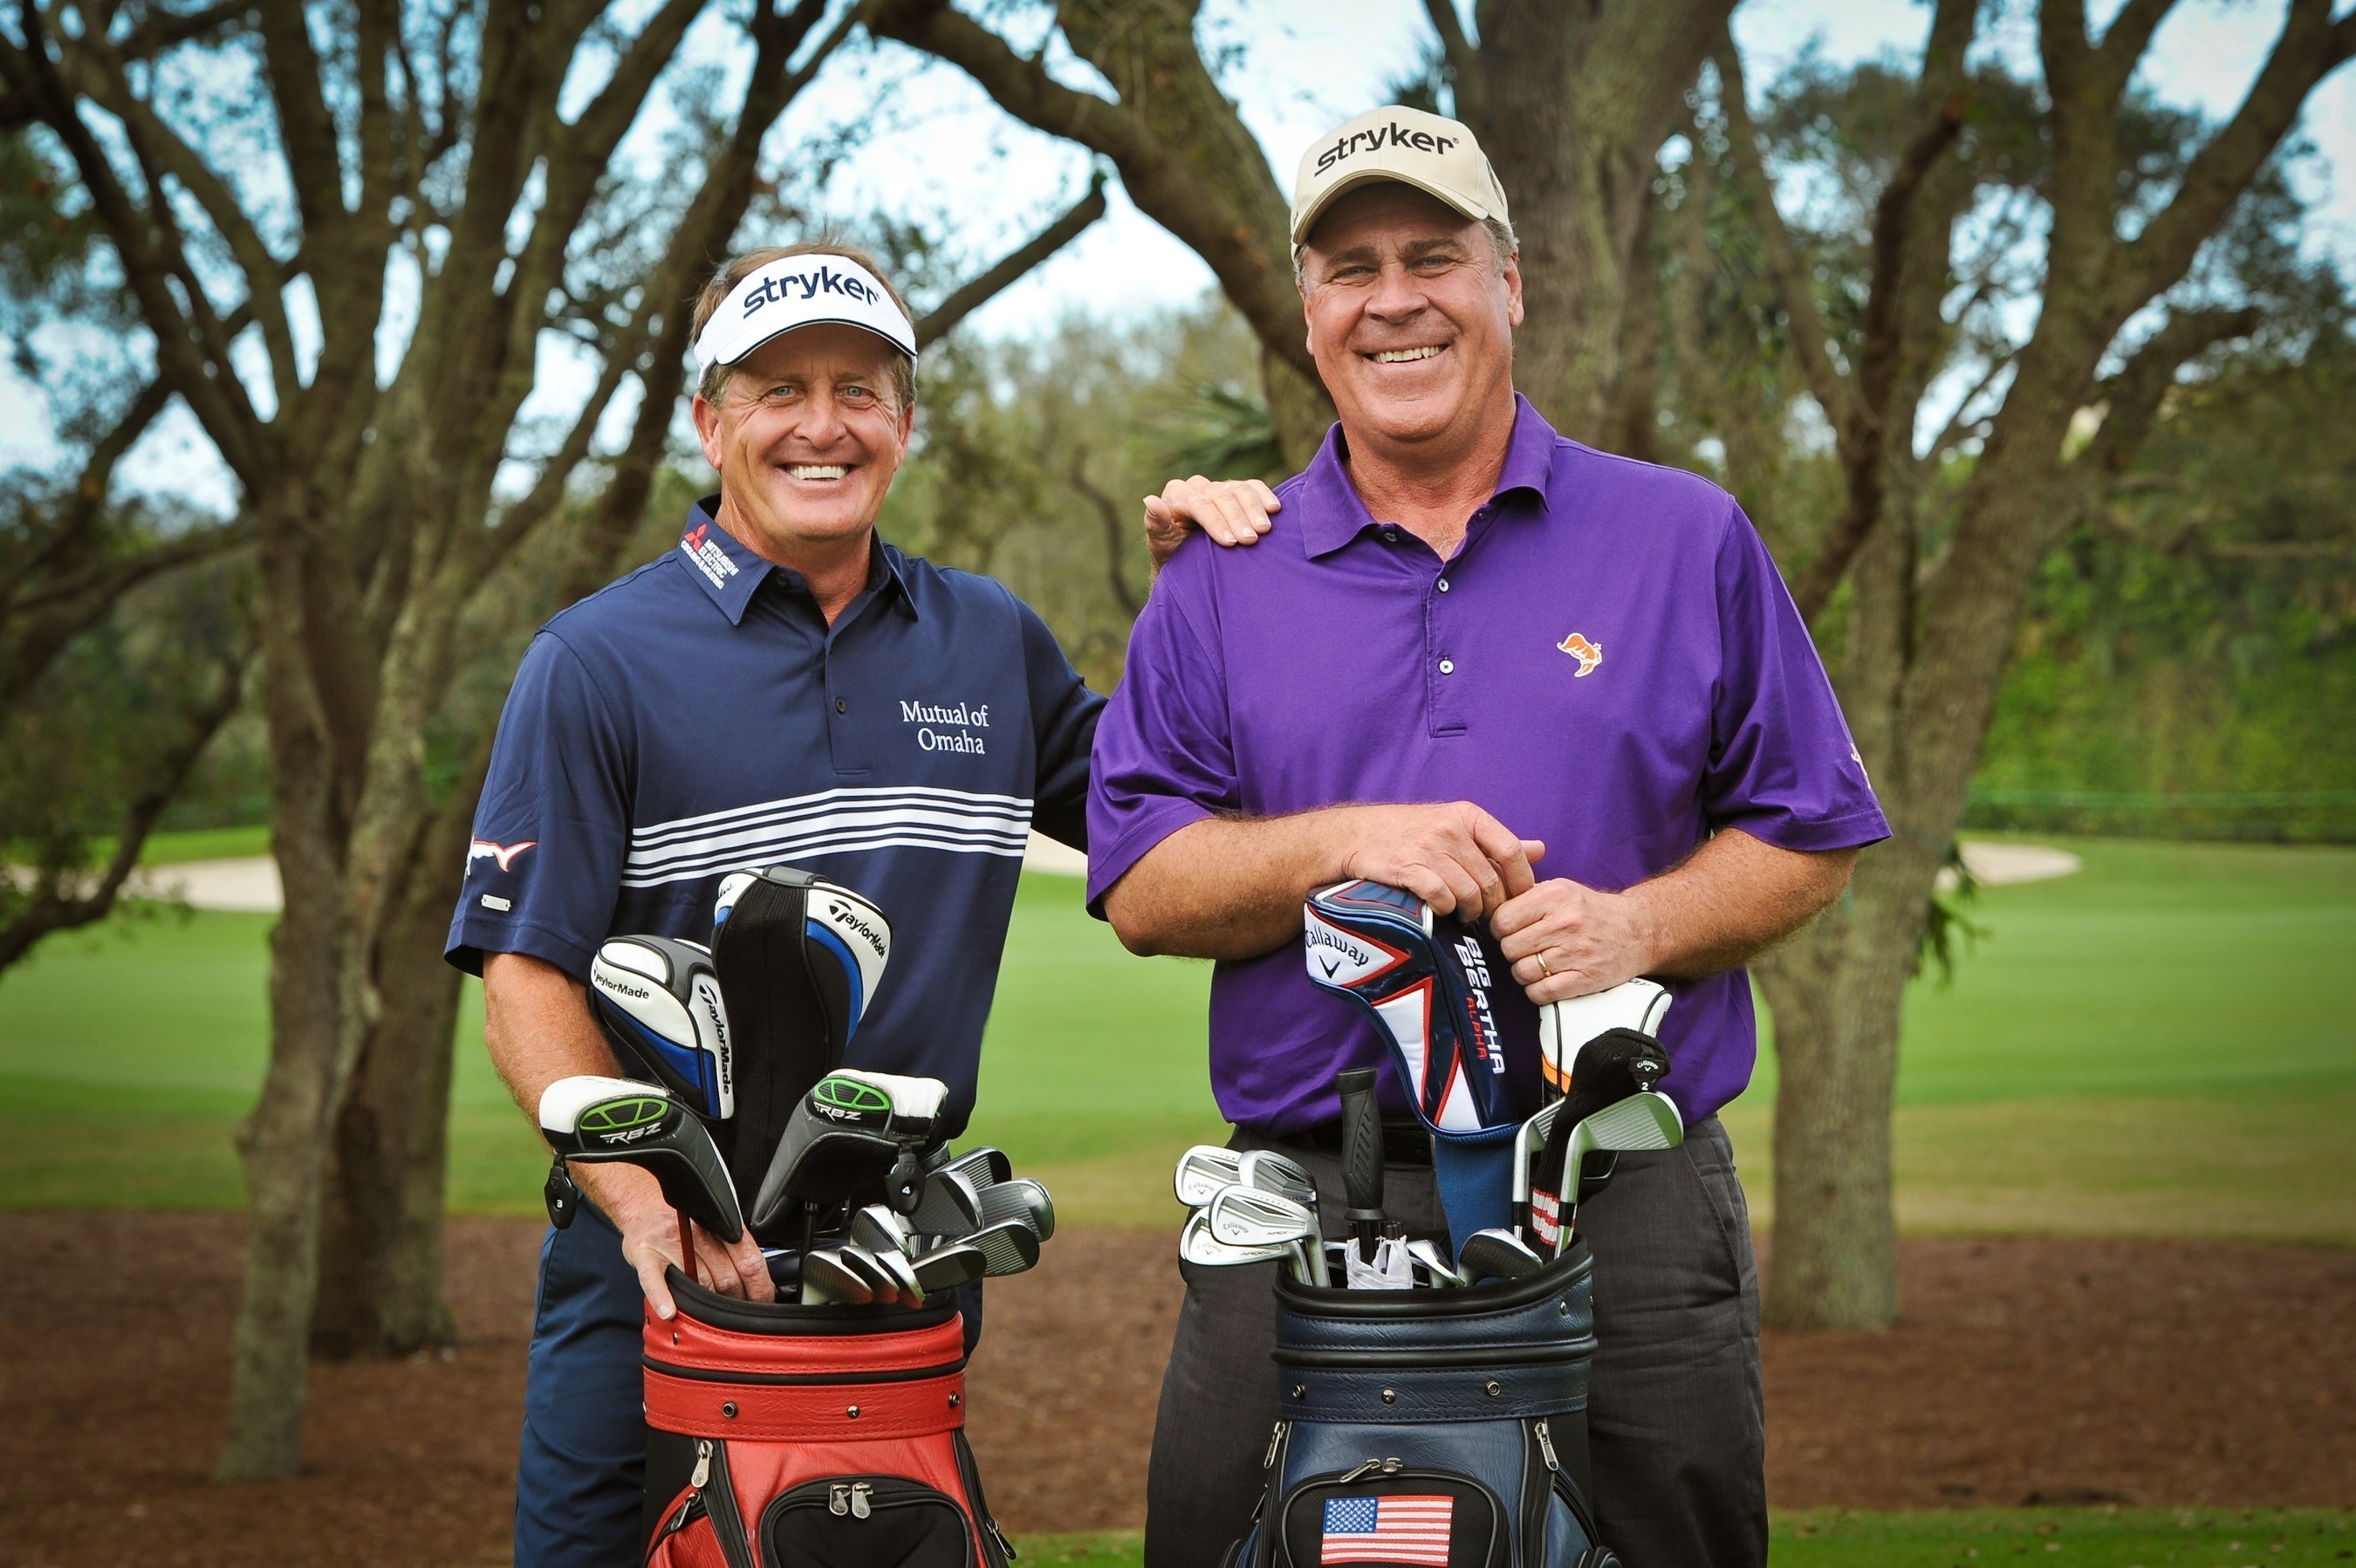 Pictured from left to right are Stryker ambassadors and Champions Tour golfers Fred Funk and Hal Sutton. Funk (total knee replacement) and Sutton (two total hip replacements) have both undergone joint replacement procedures with Stryker products. (PRNewsFoto/Stryker)